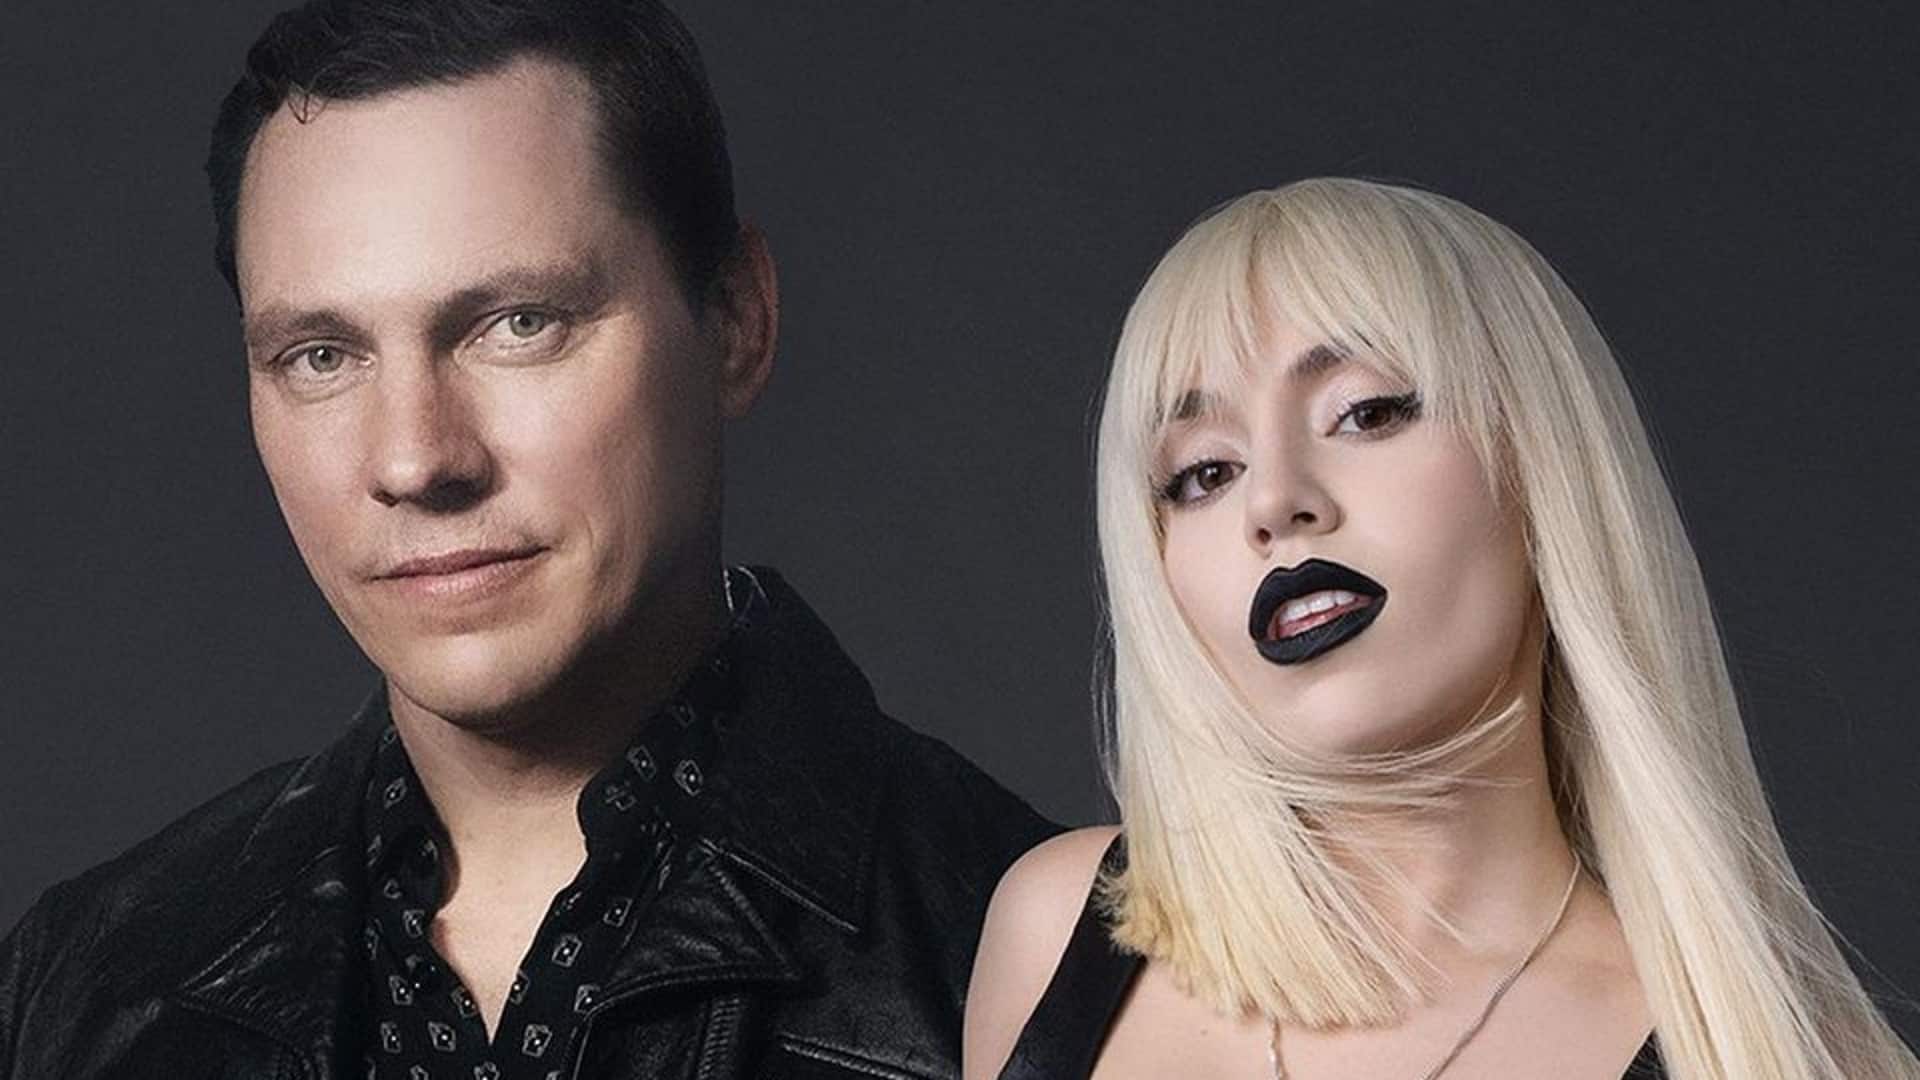 Tiësto & Ava Max unveil second official music video for ‘The Motto’: Watch